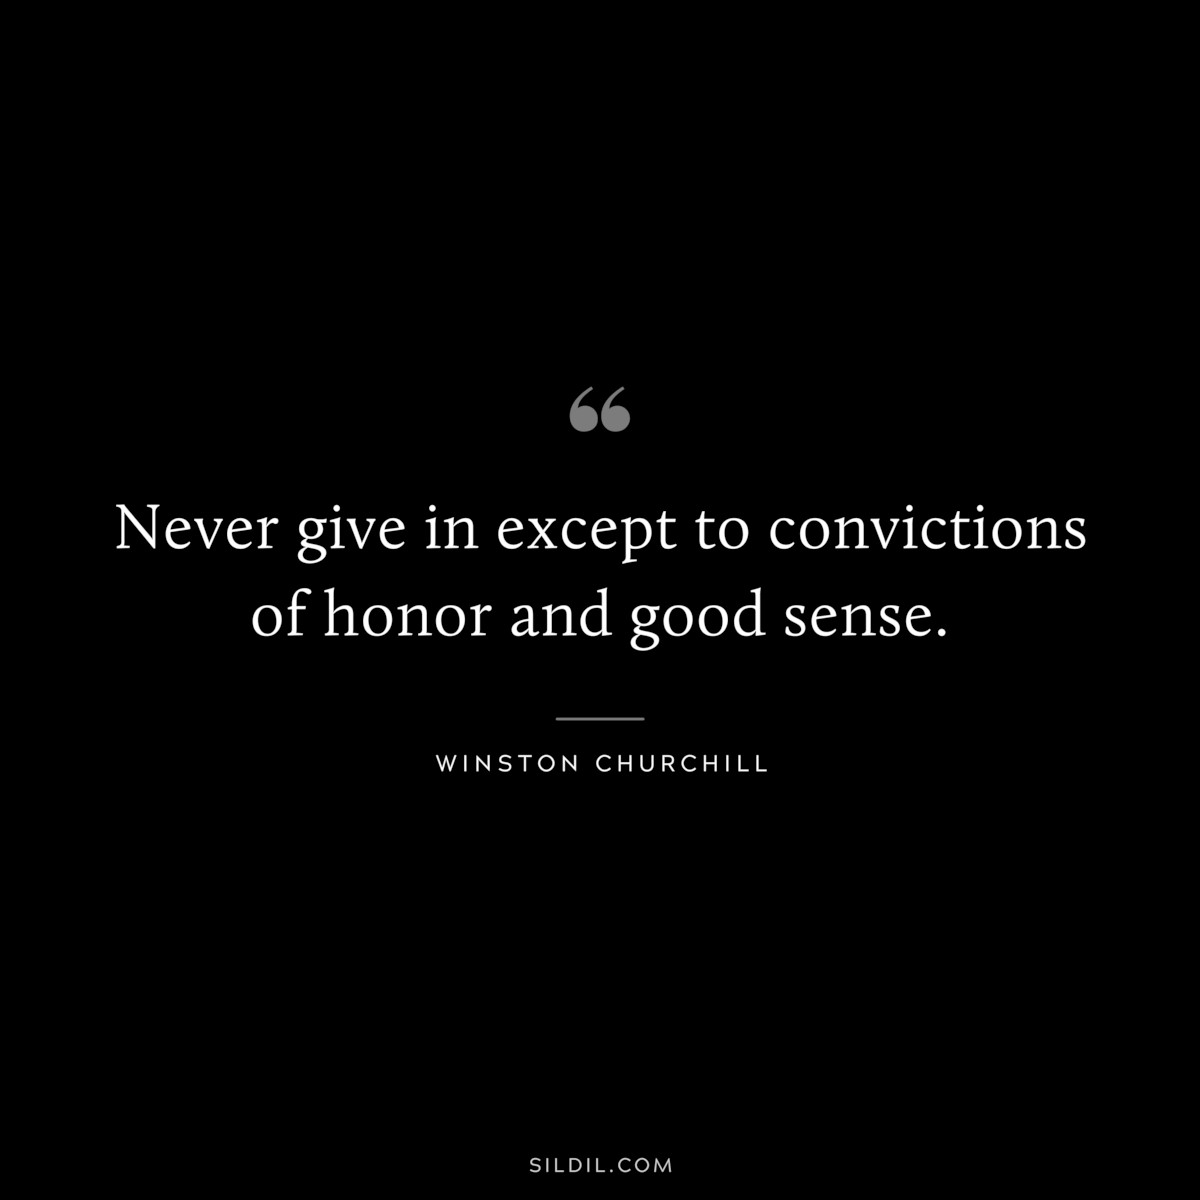 Never give in except to convictions of honor and good sense. ― Winston Churchill